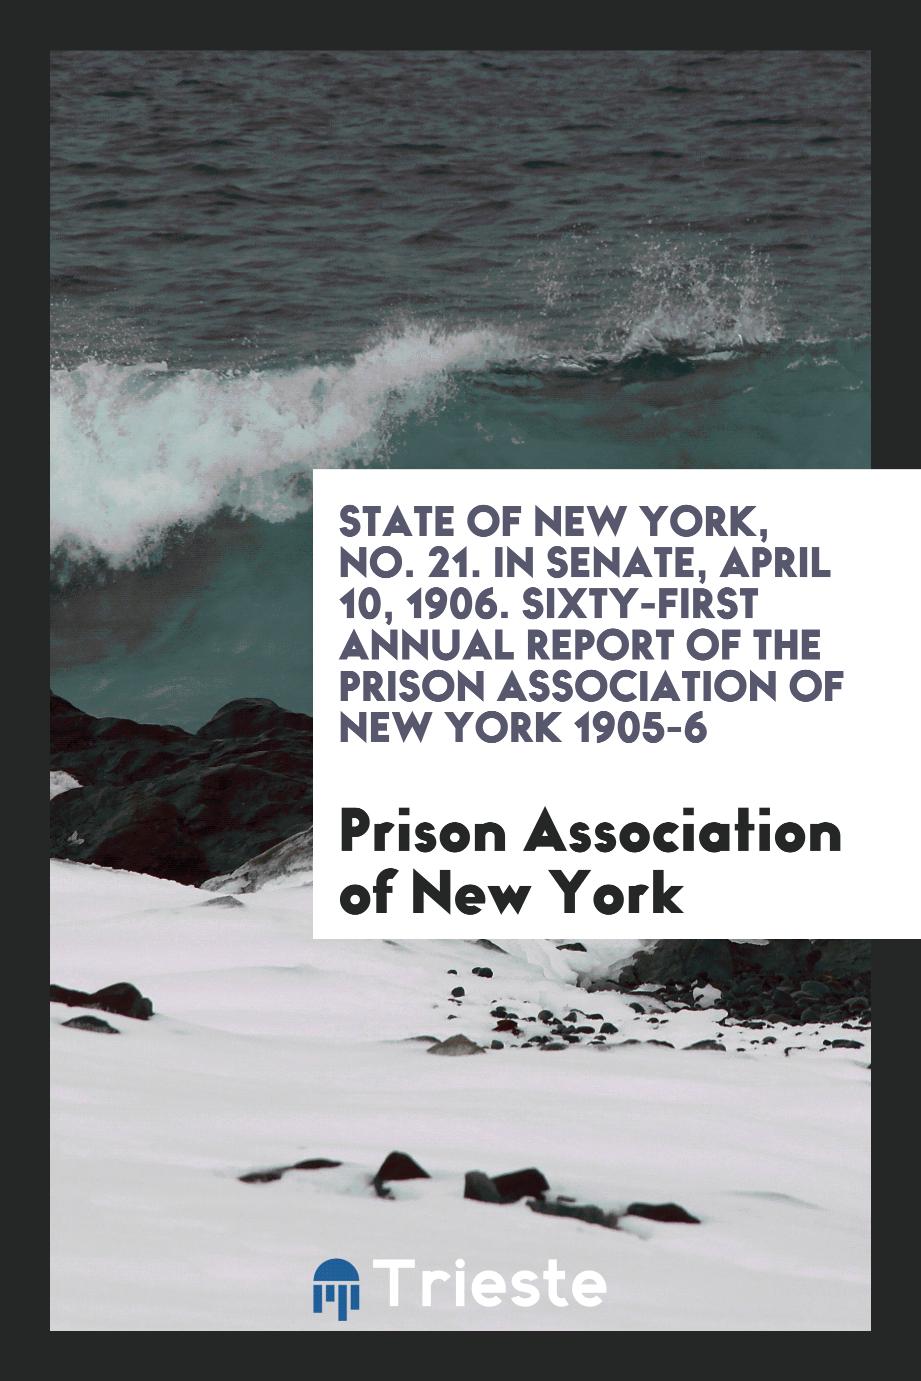 State of New York, No. 21. In Senate, April 10, 1906. Sixty-First Annual Report of the Prison Association of New York 1905-6